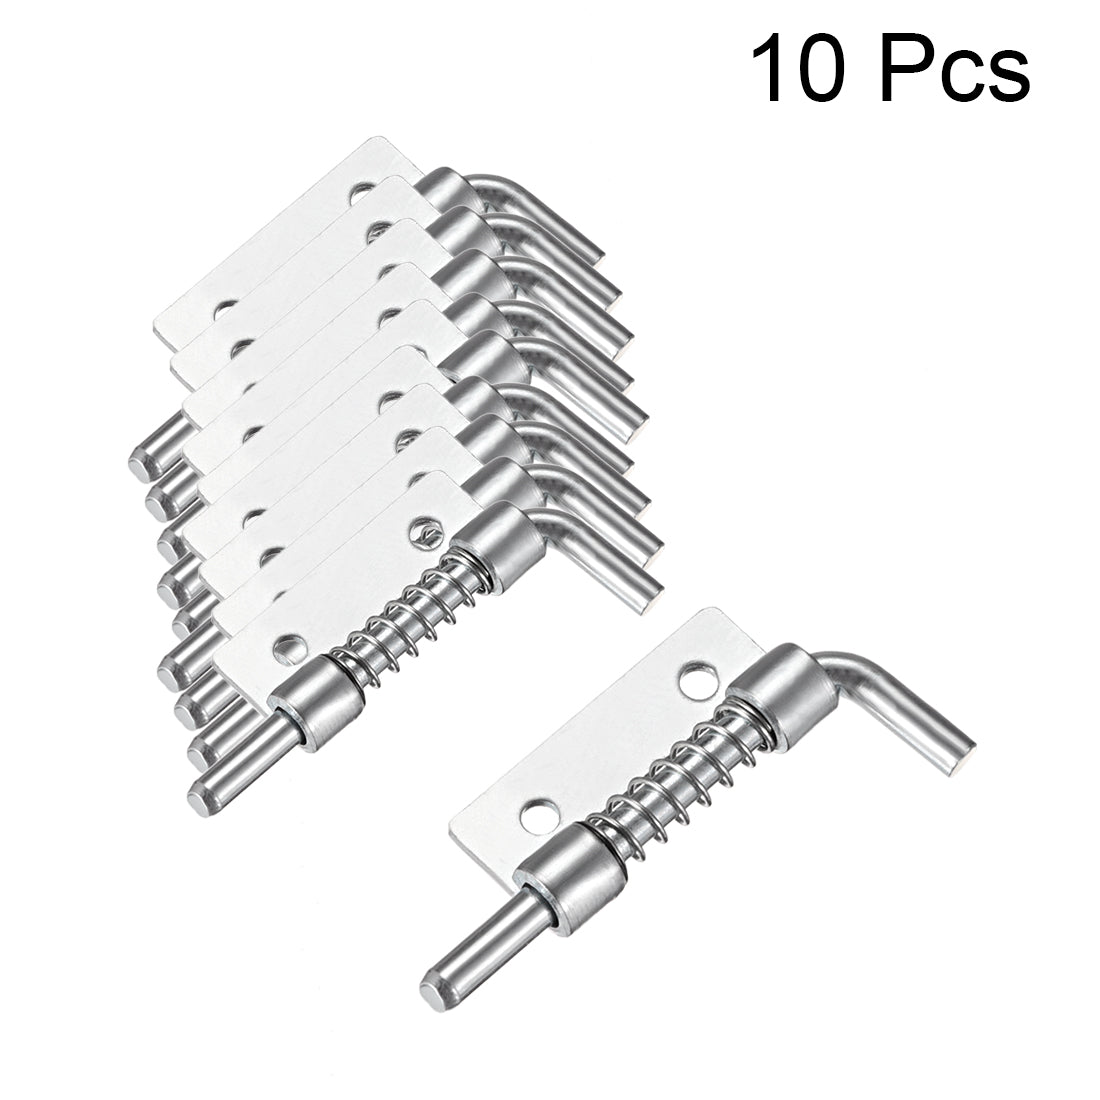 Uxcell Uxcell 10pcs Carbon Steel Lock Bolt Spring Loaded Pin Latch 93mm Long (Right)